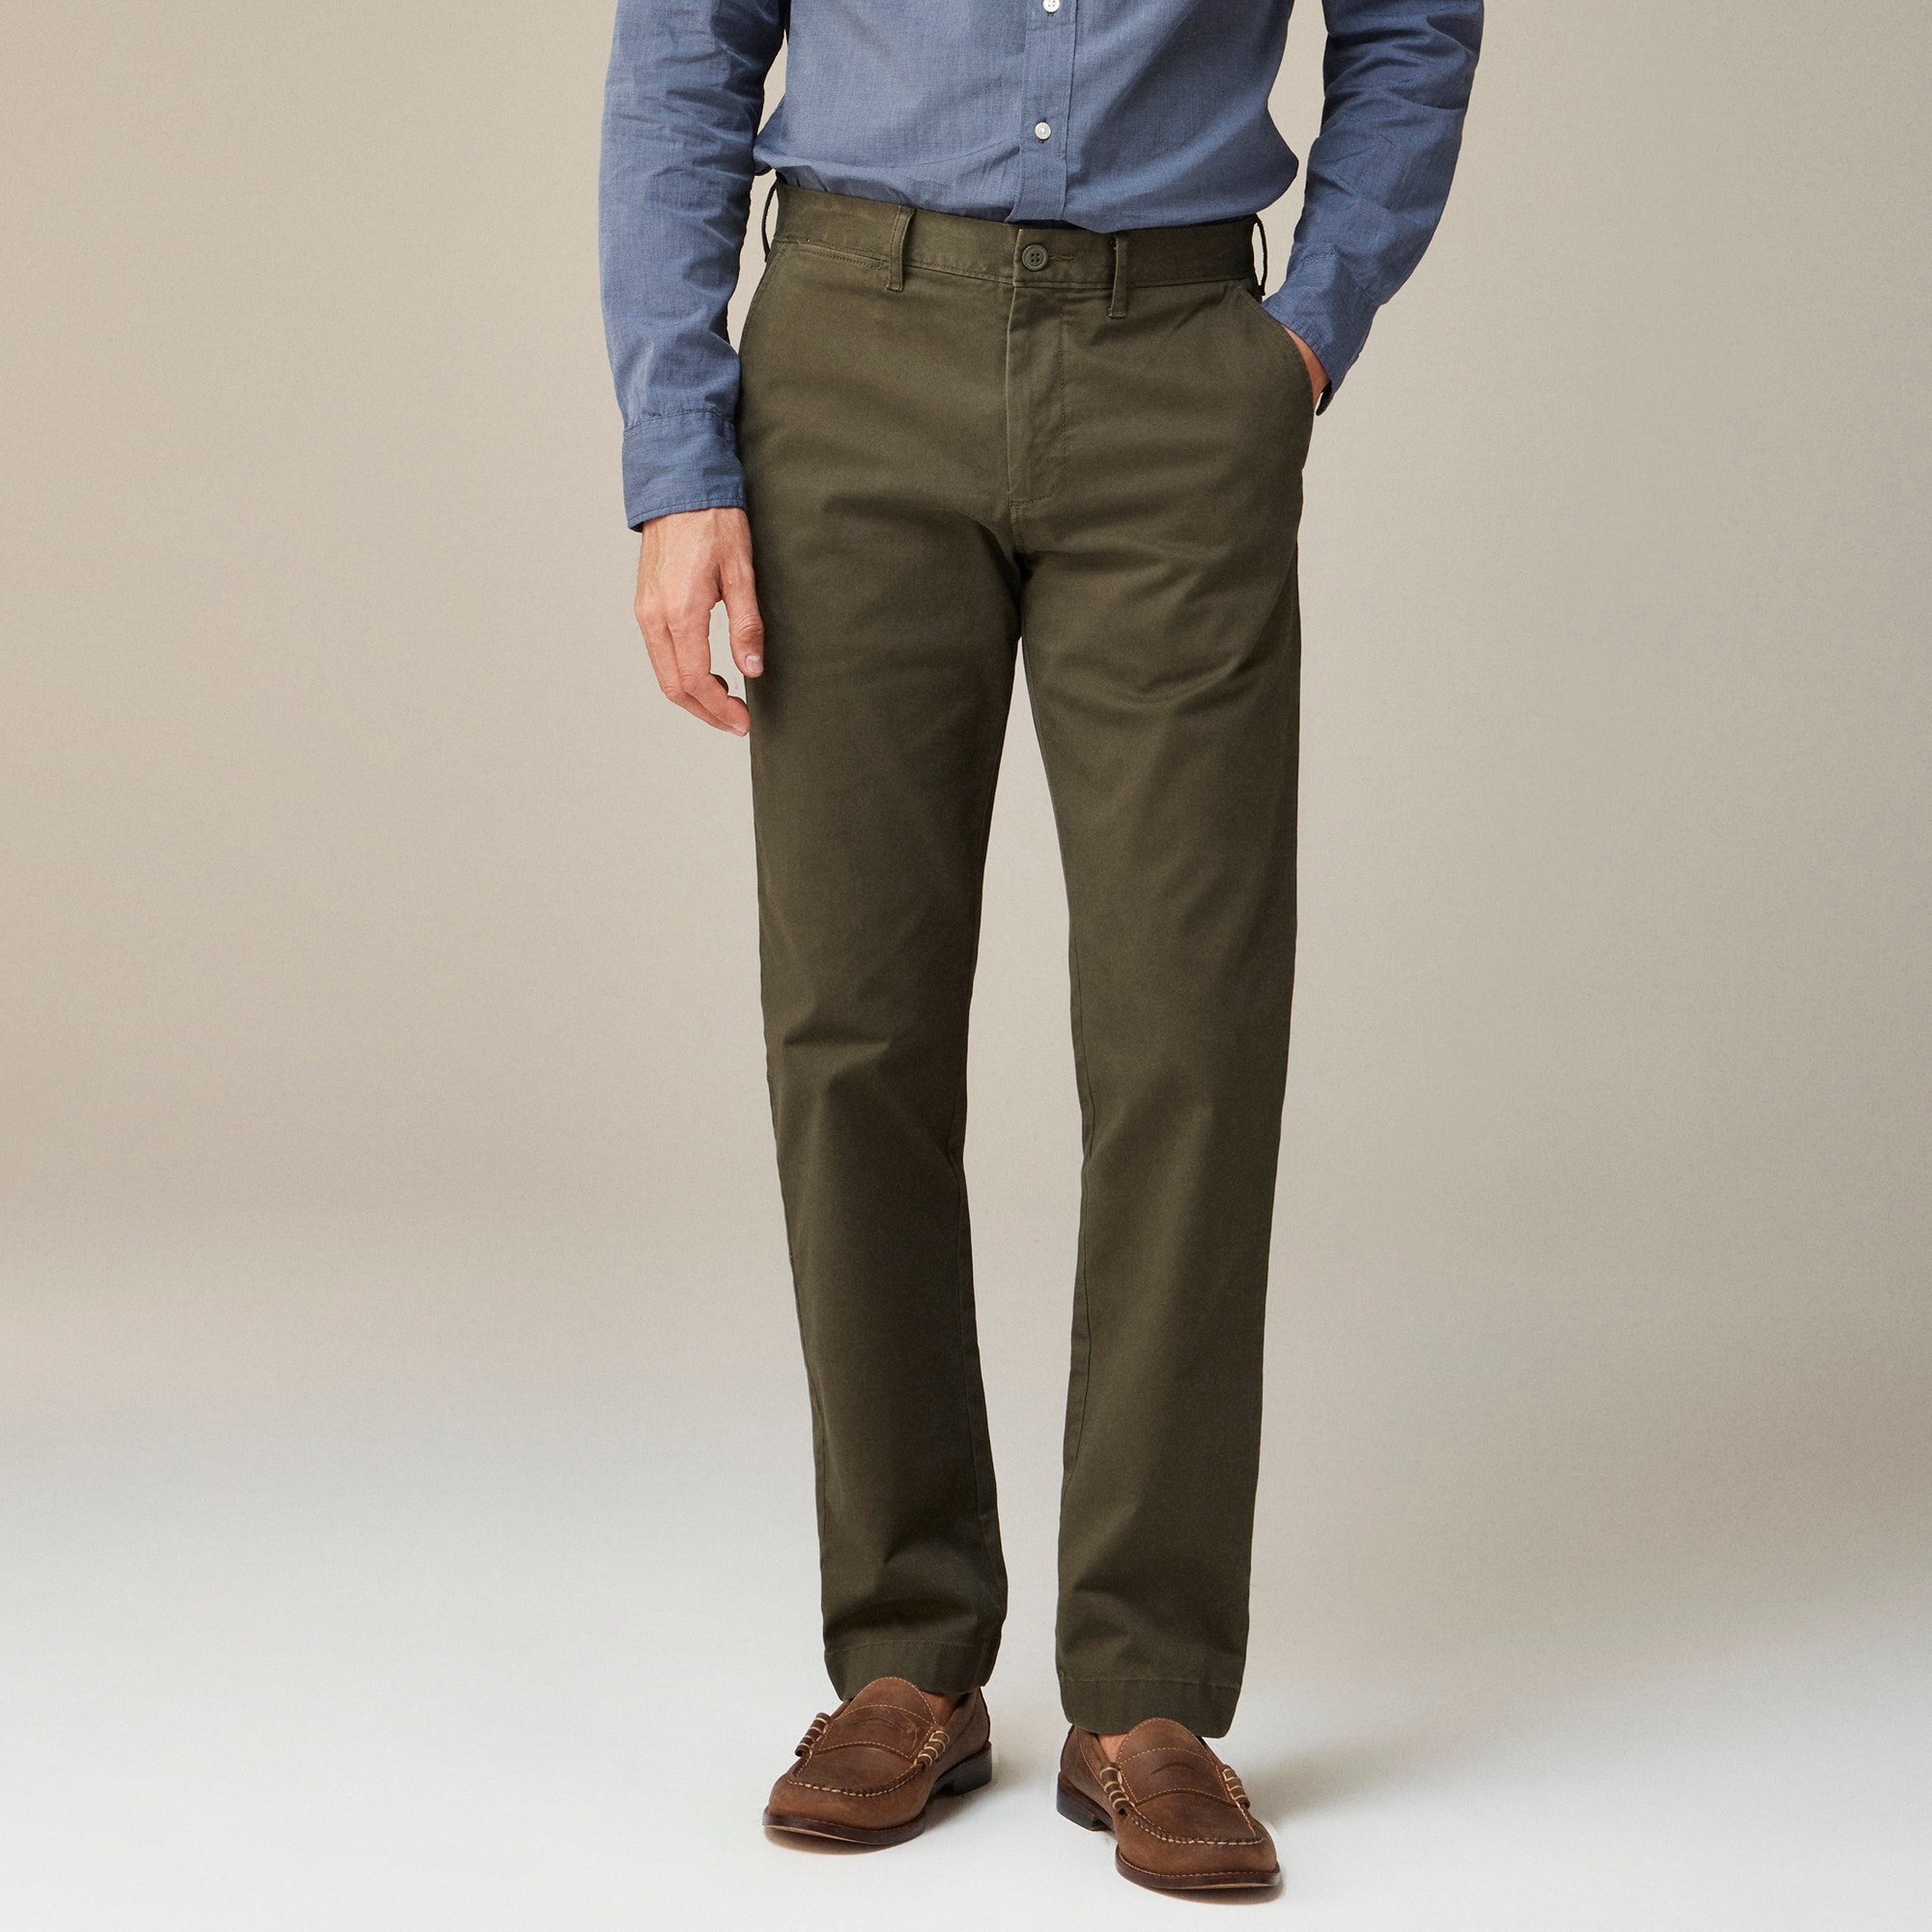 770™ Straight-fit stretch chino pant